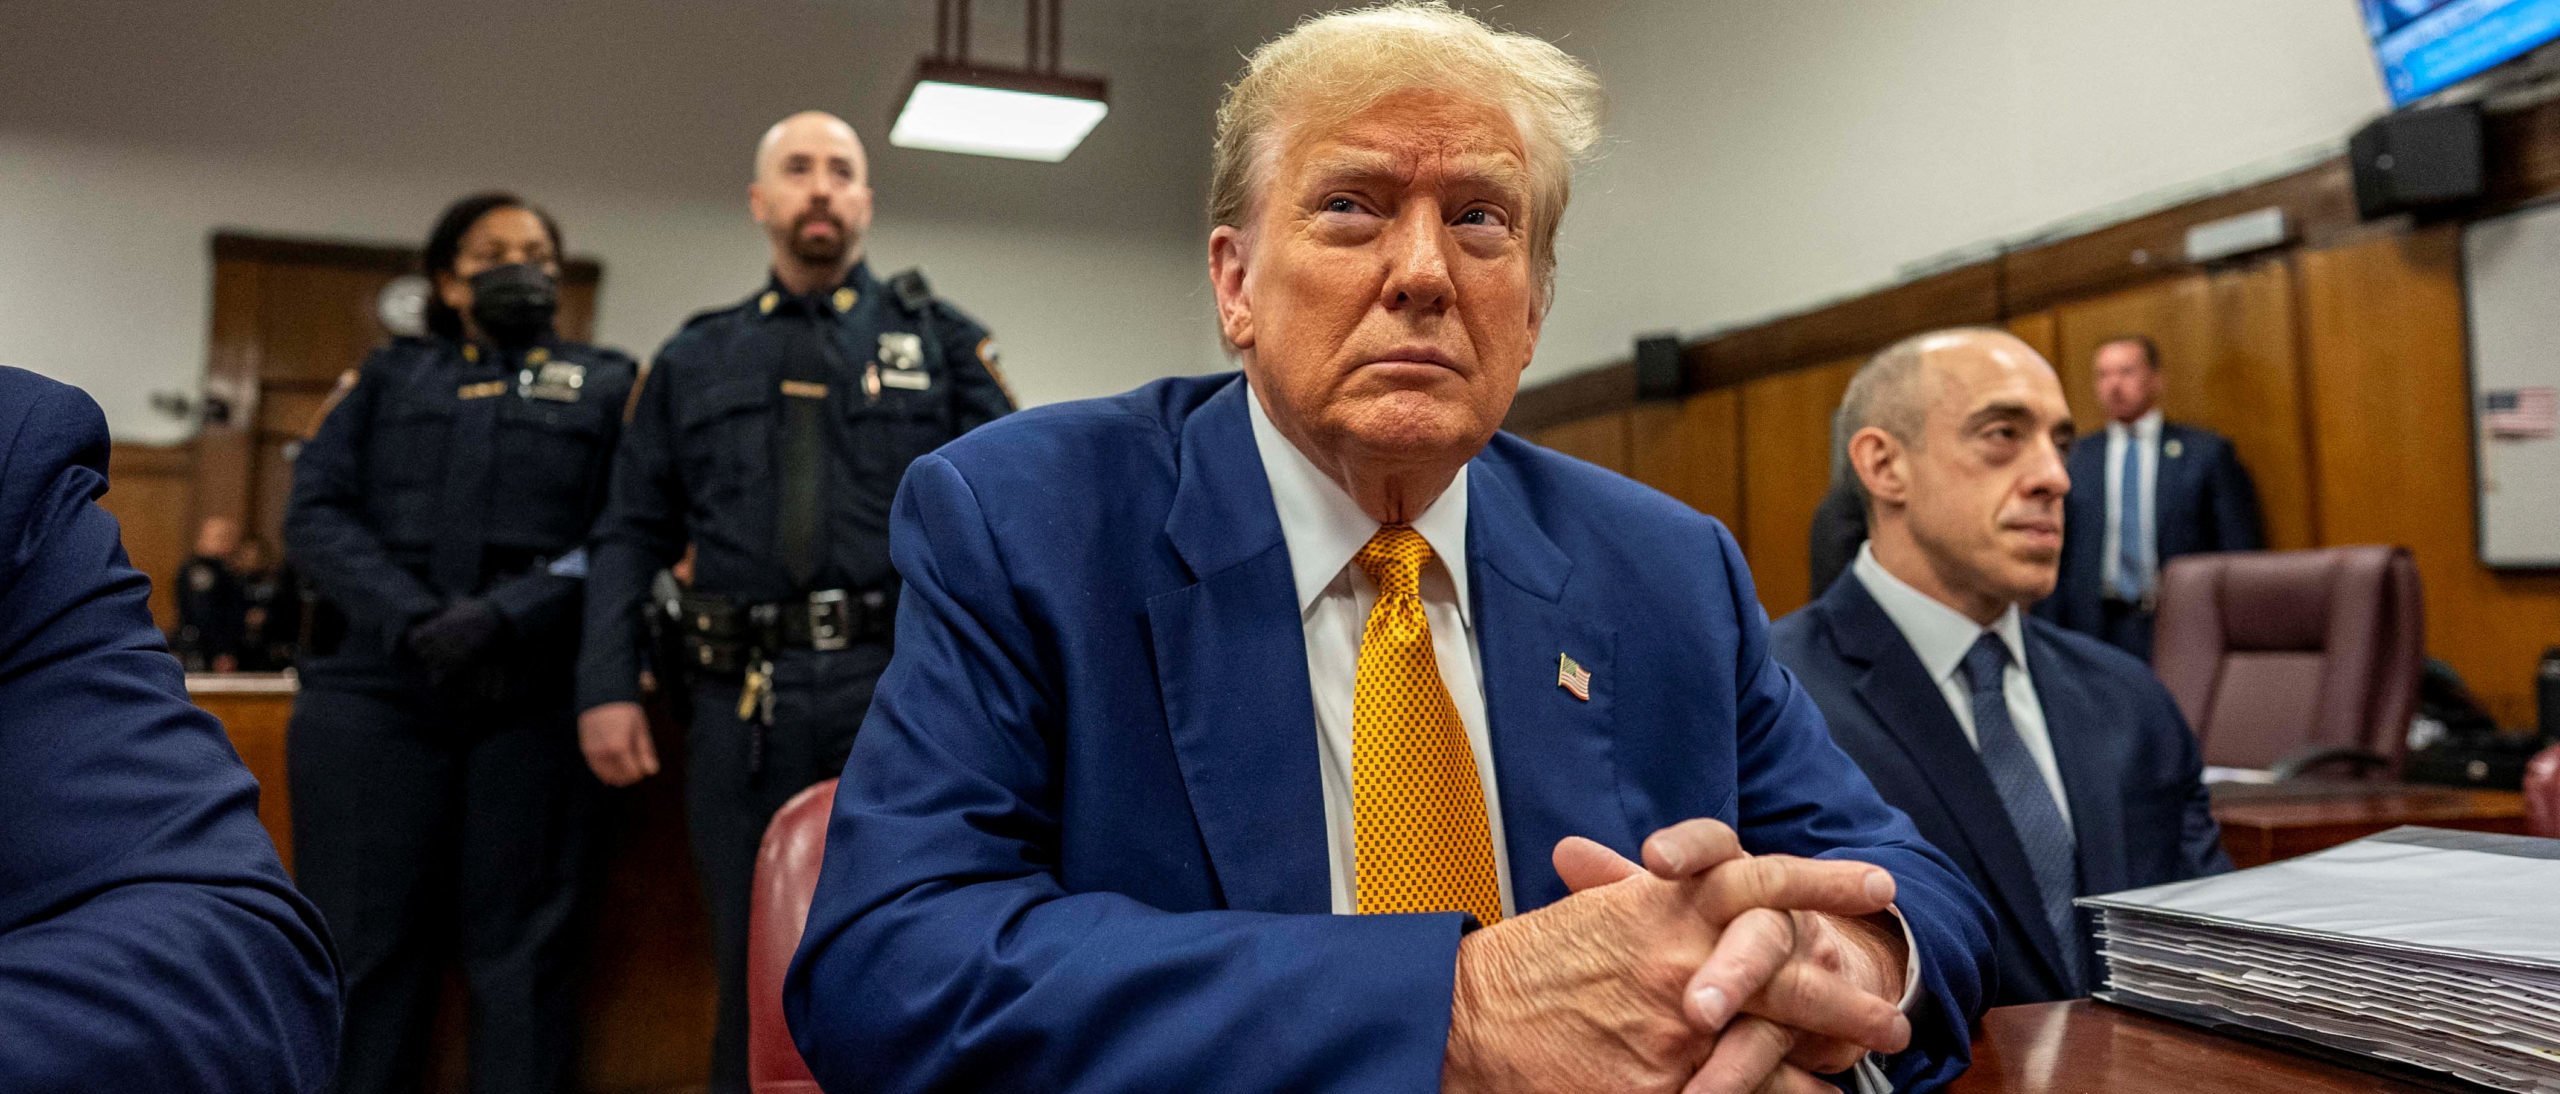 Republican presidential candidate, former U.S. President Donald Trump sits inside Manhattan Criminal Court room waiting for the start of the proceedings of his criminal trial at the New York State Supreme Court in New York, New York, Thursday, May, 2, 2024. Mark Peterson/Pool via REUTERS